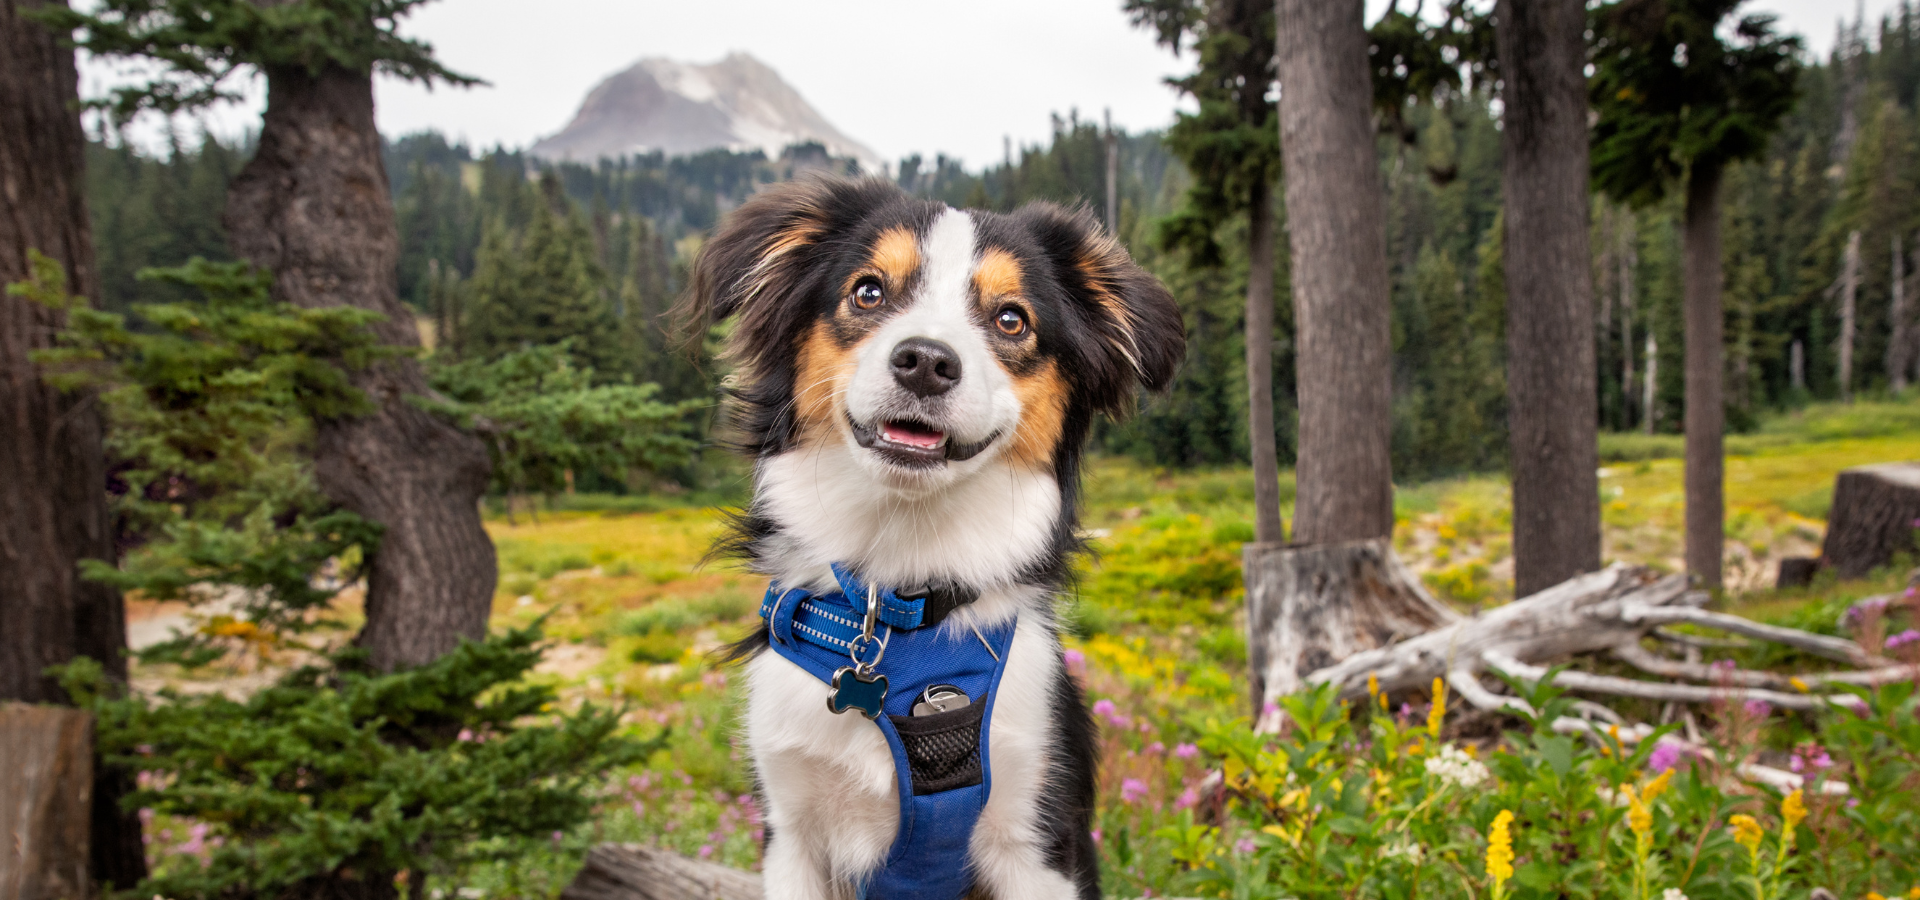 Small dog posing in front of a mountain landscape